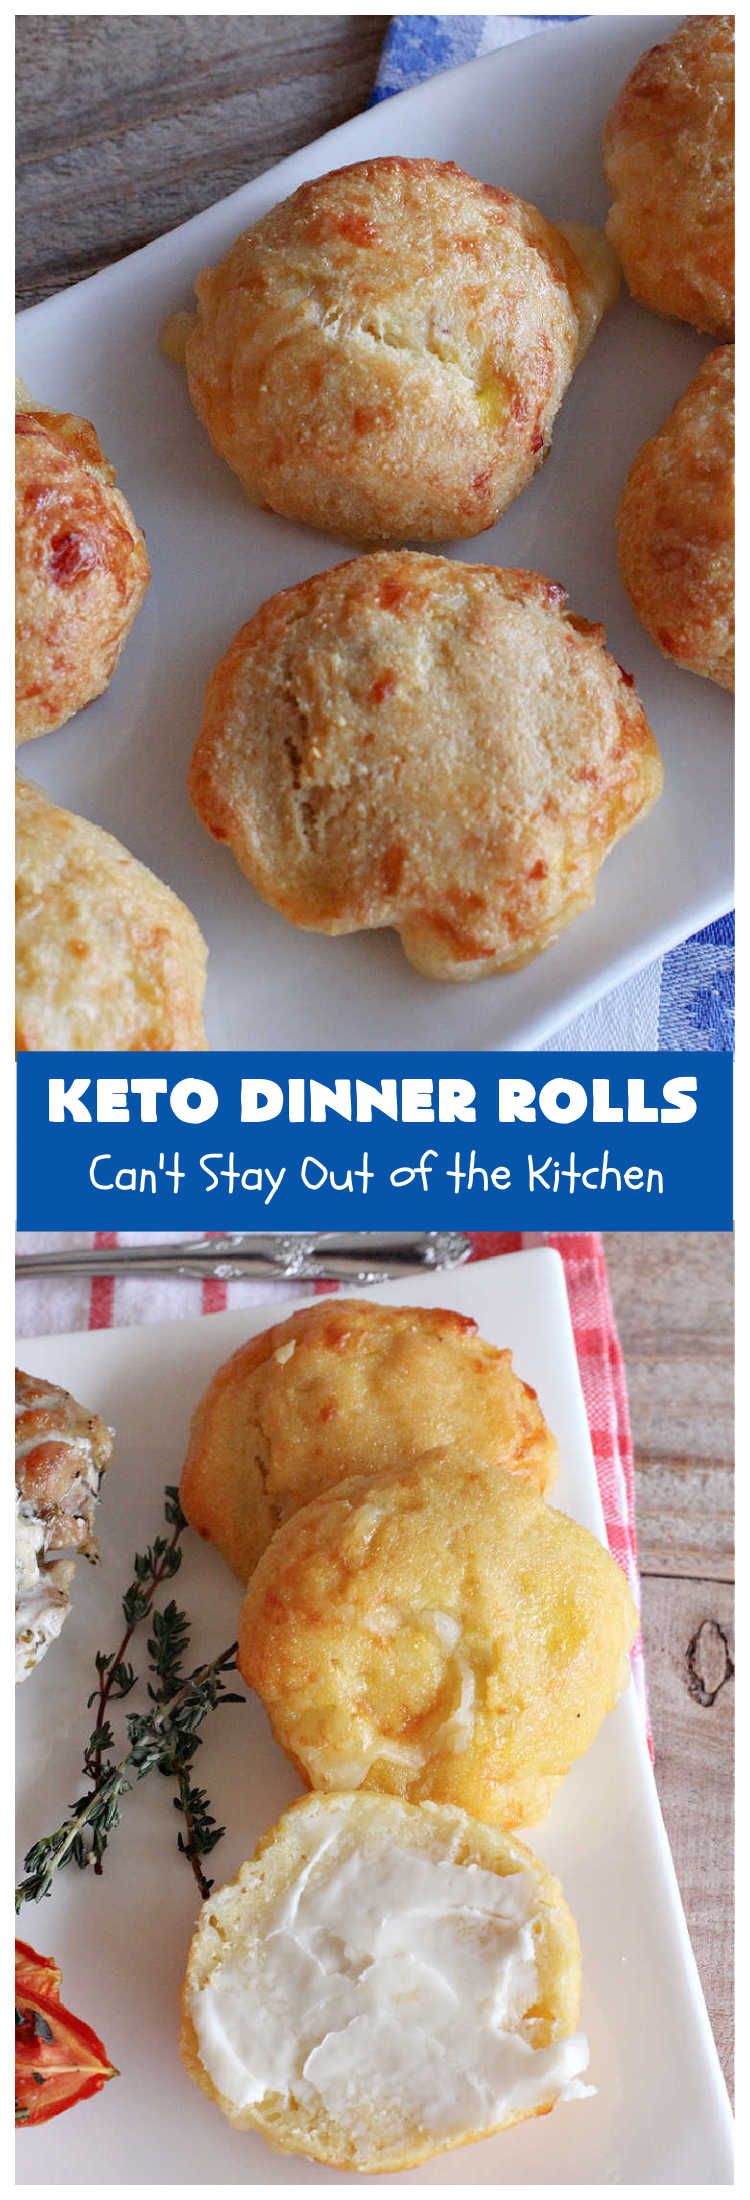 Keto Dinner Rolls | Can't Stay Out of the Kitchen